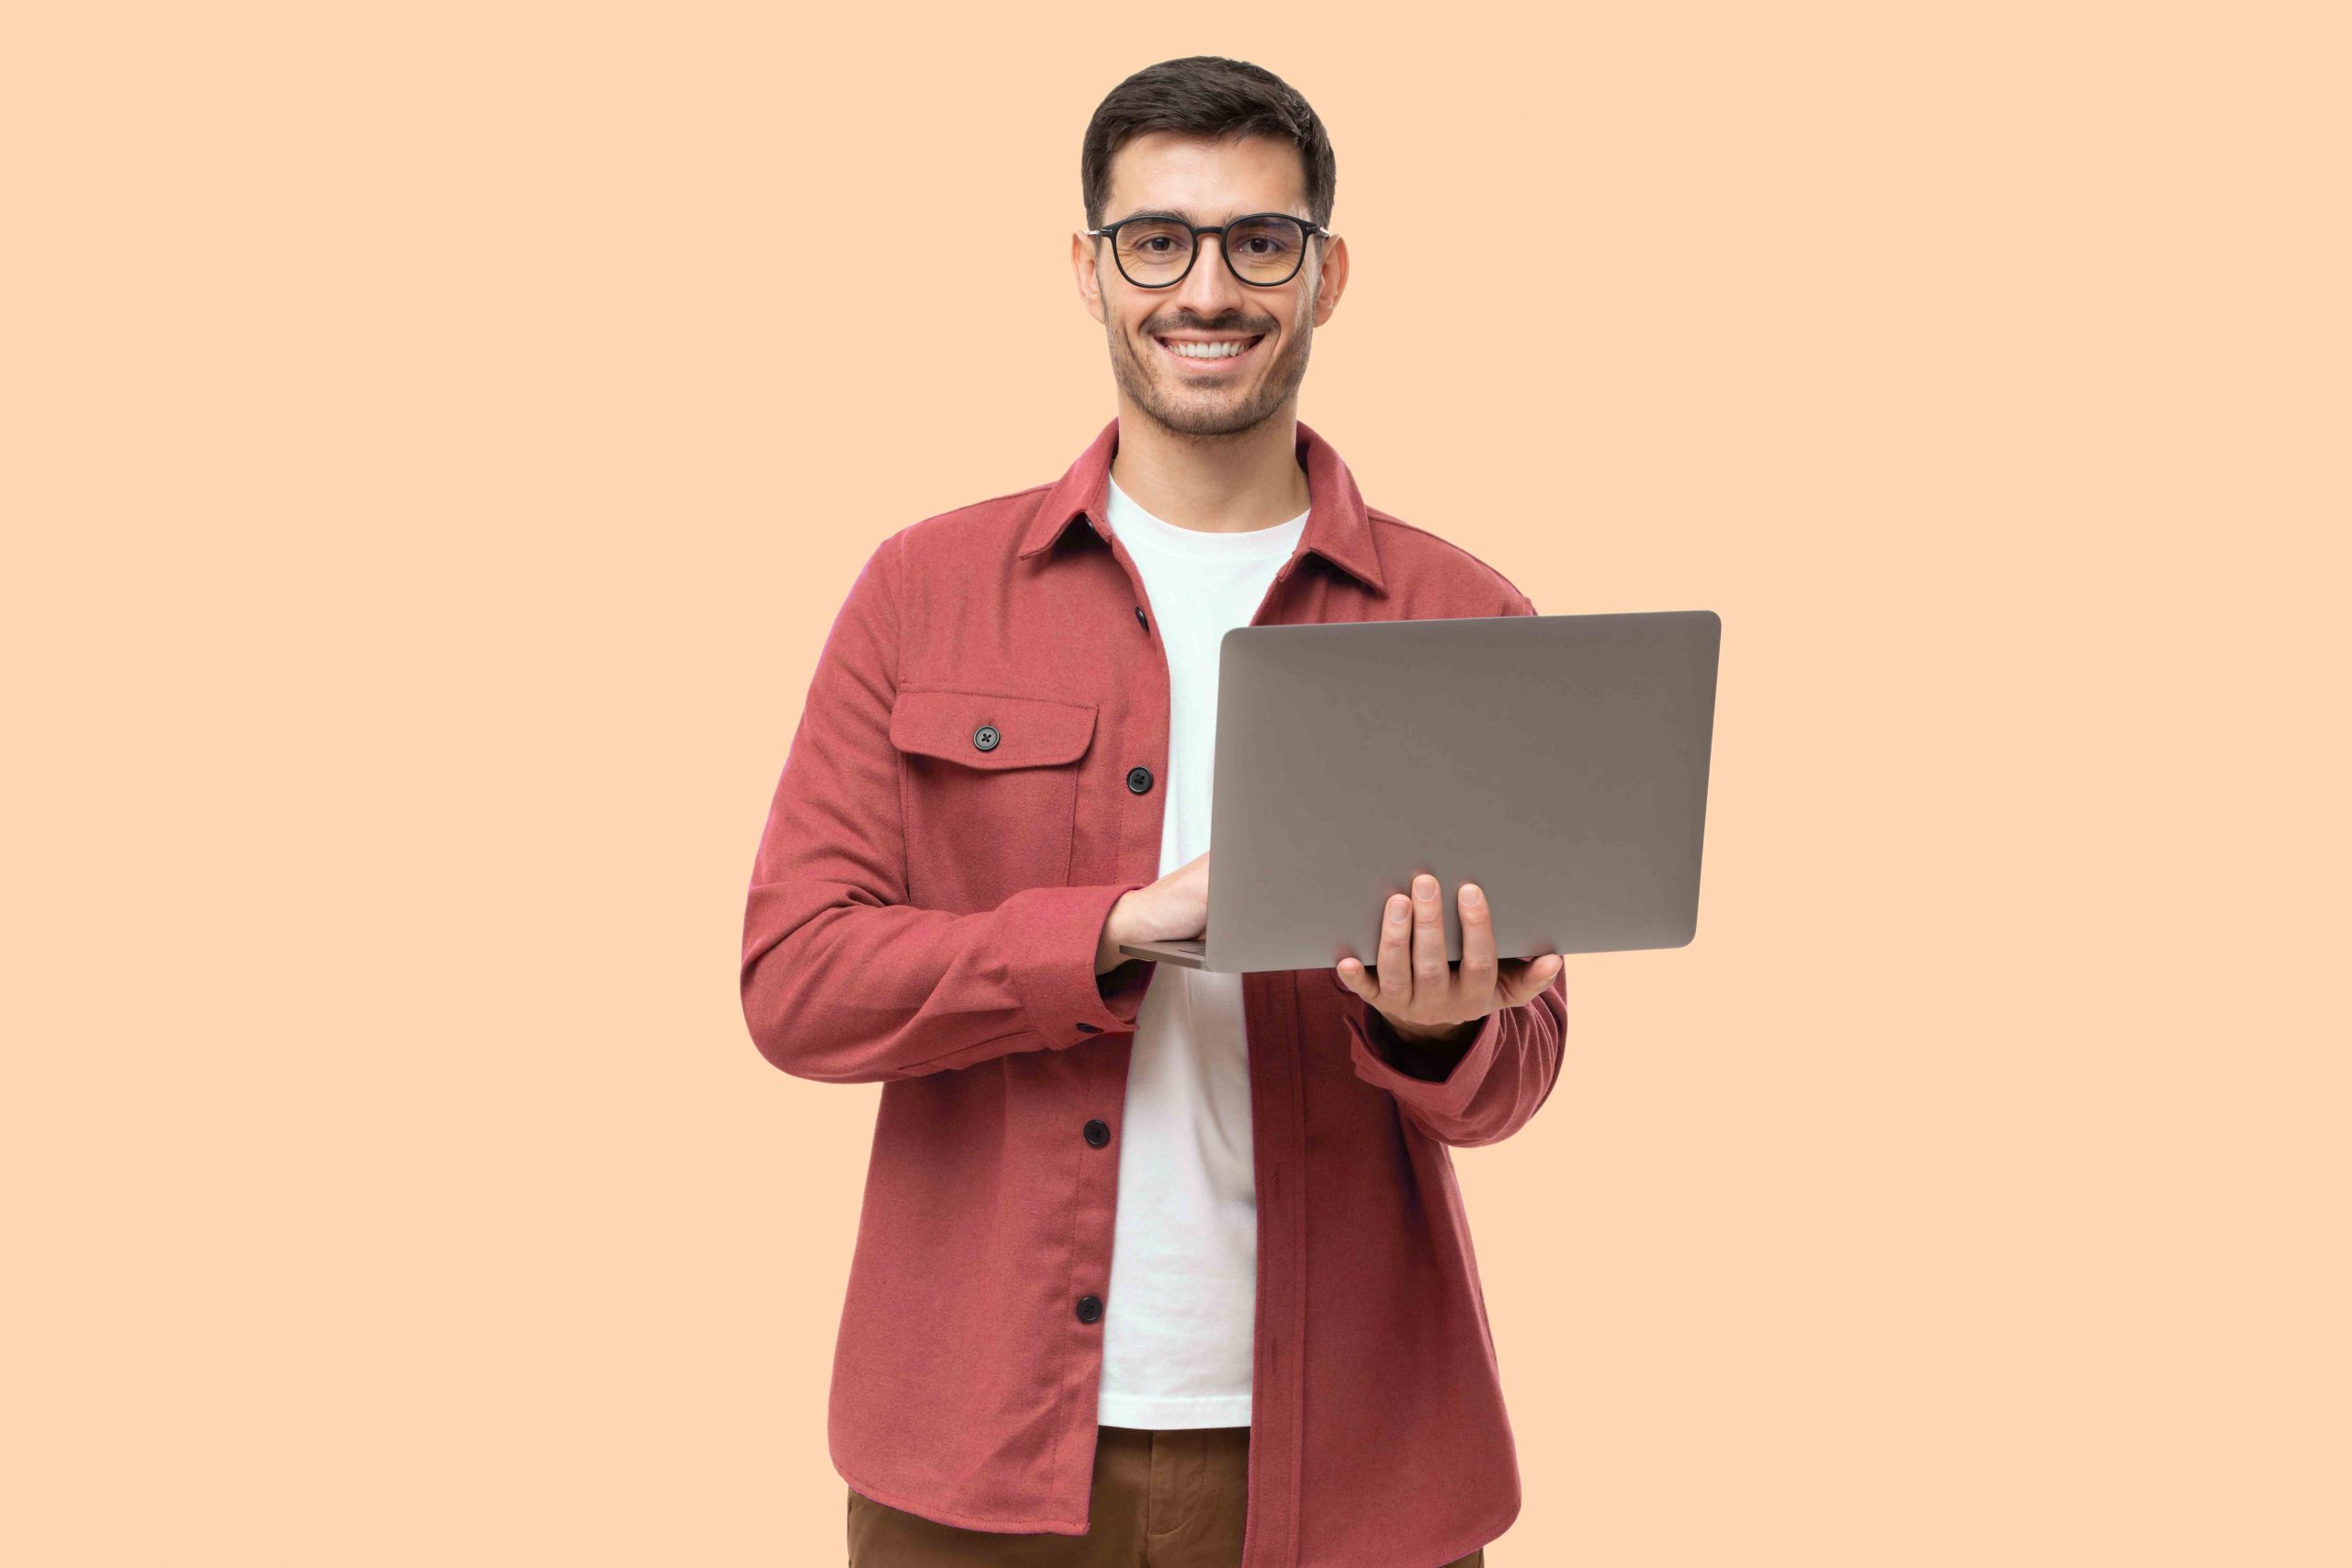 Young man standing holding laptop and looking at camera with a happy smile